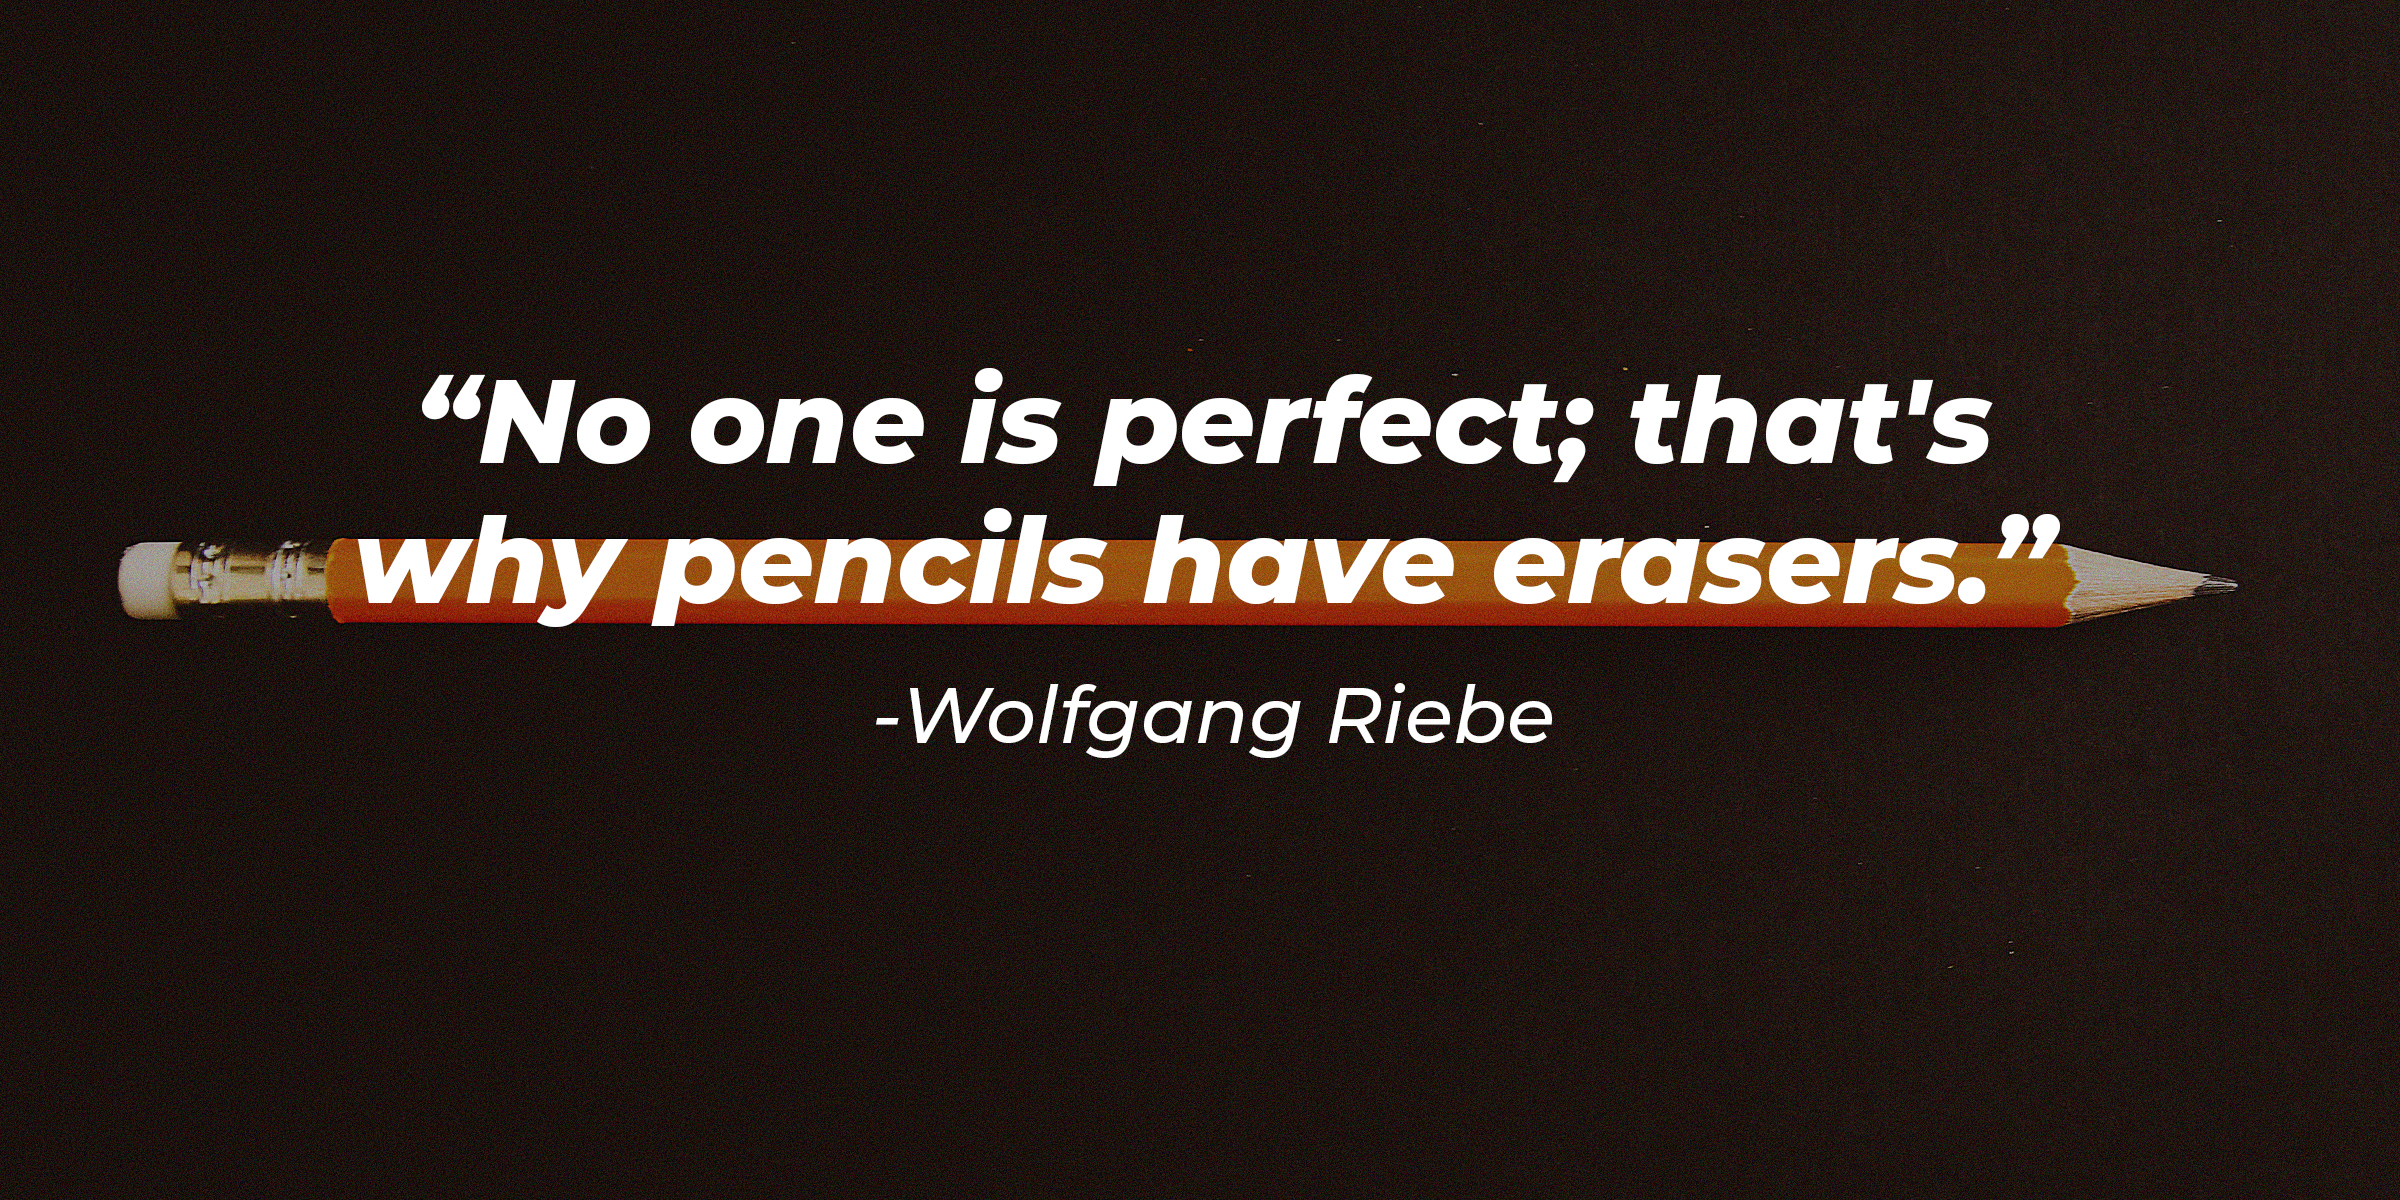 Source: Unsplash | Photo of a pencil with the quote: "No one is perfect; that's why pencils have erasers."